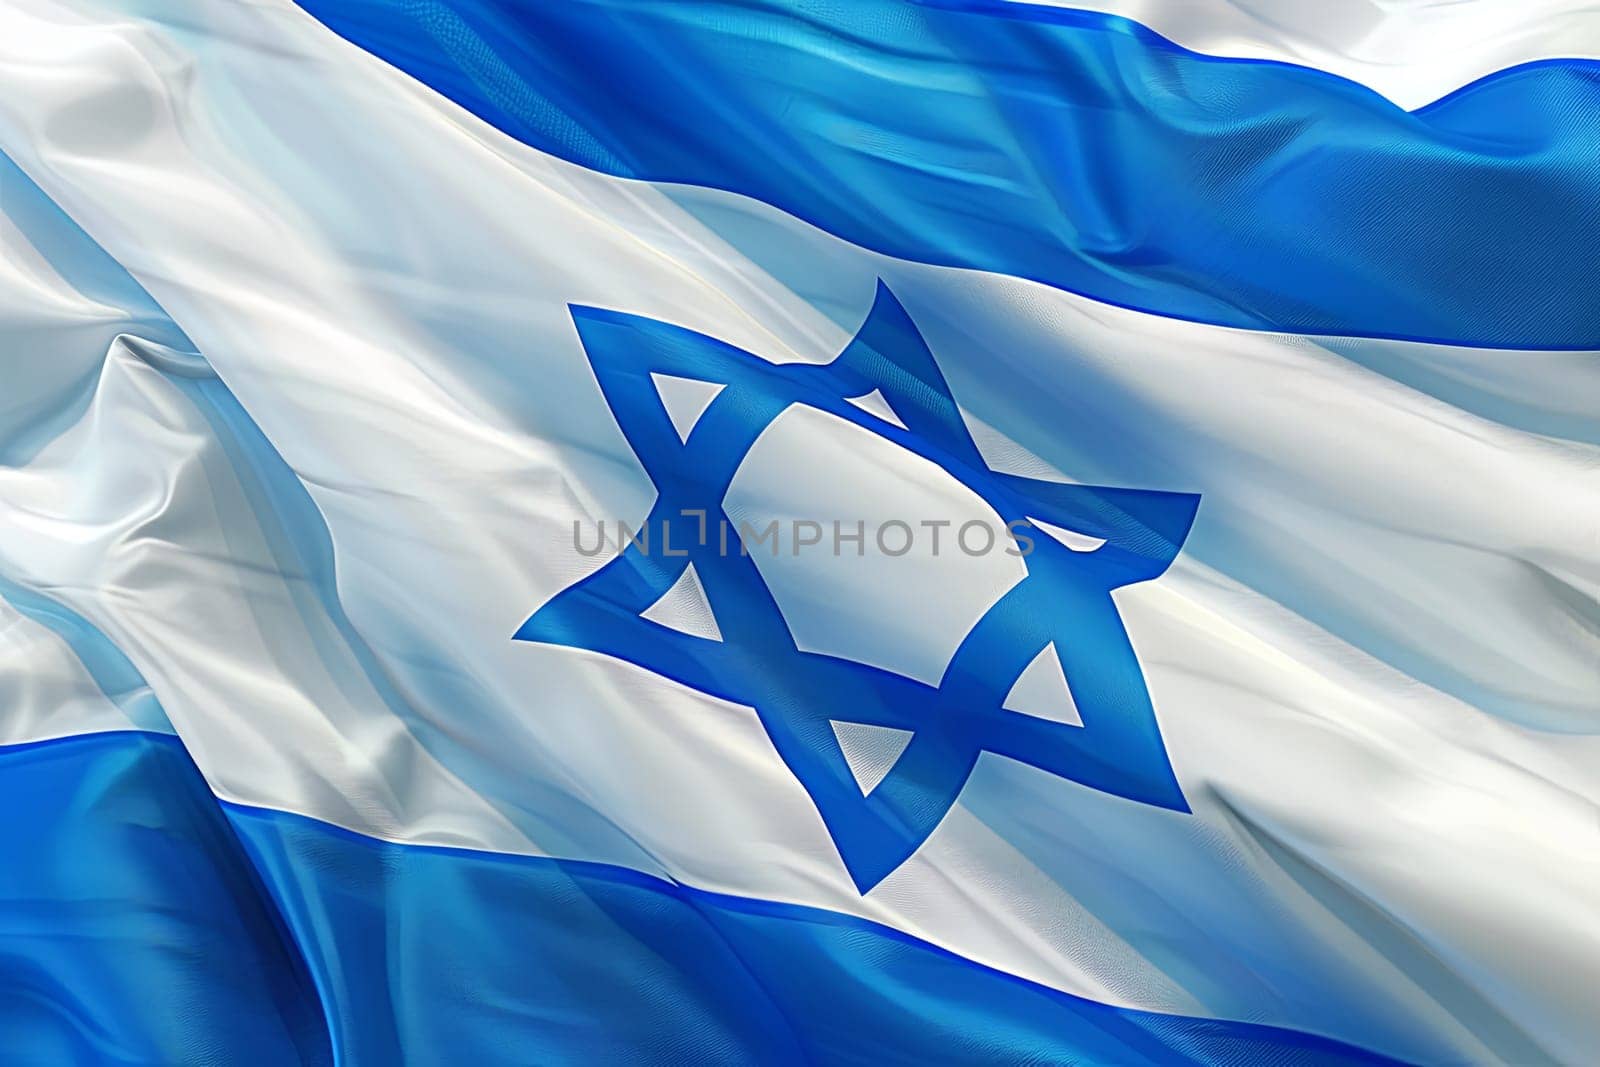 Detailed close-up of the national flag of Israel, featuring the iconic white and blue design with the Star of David, fluttering in the wind.